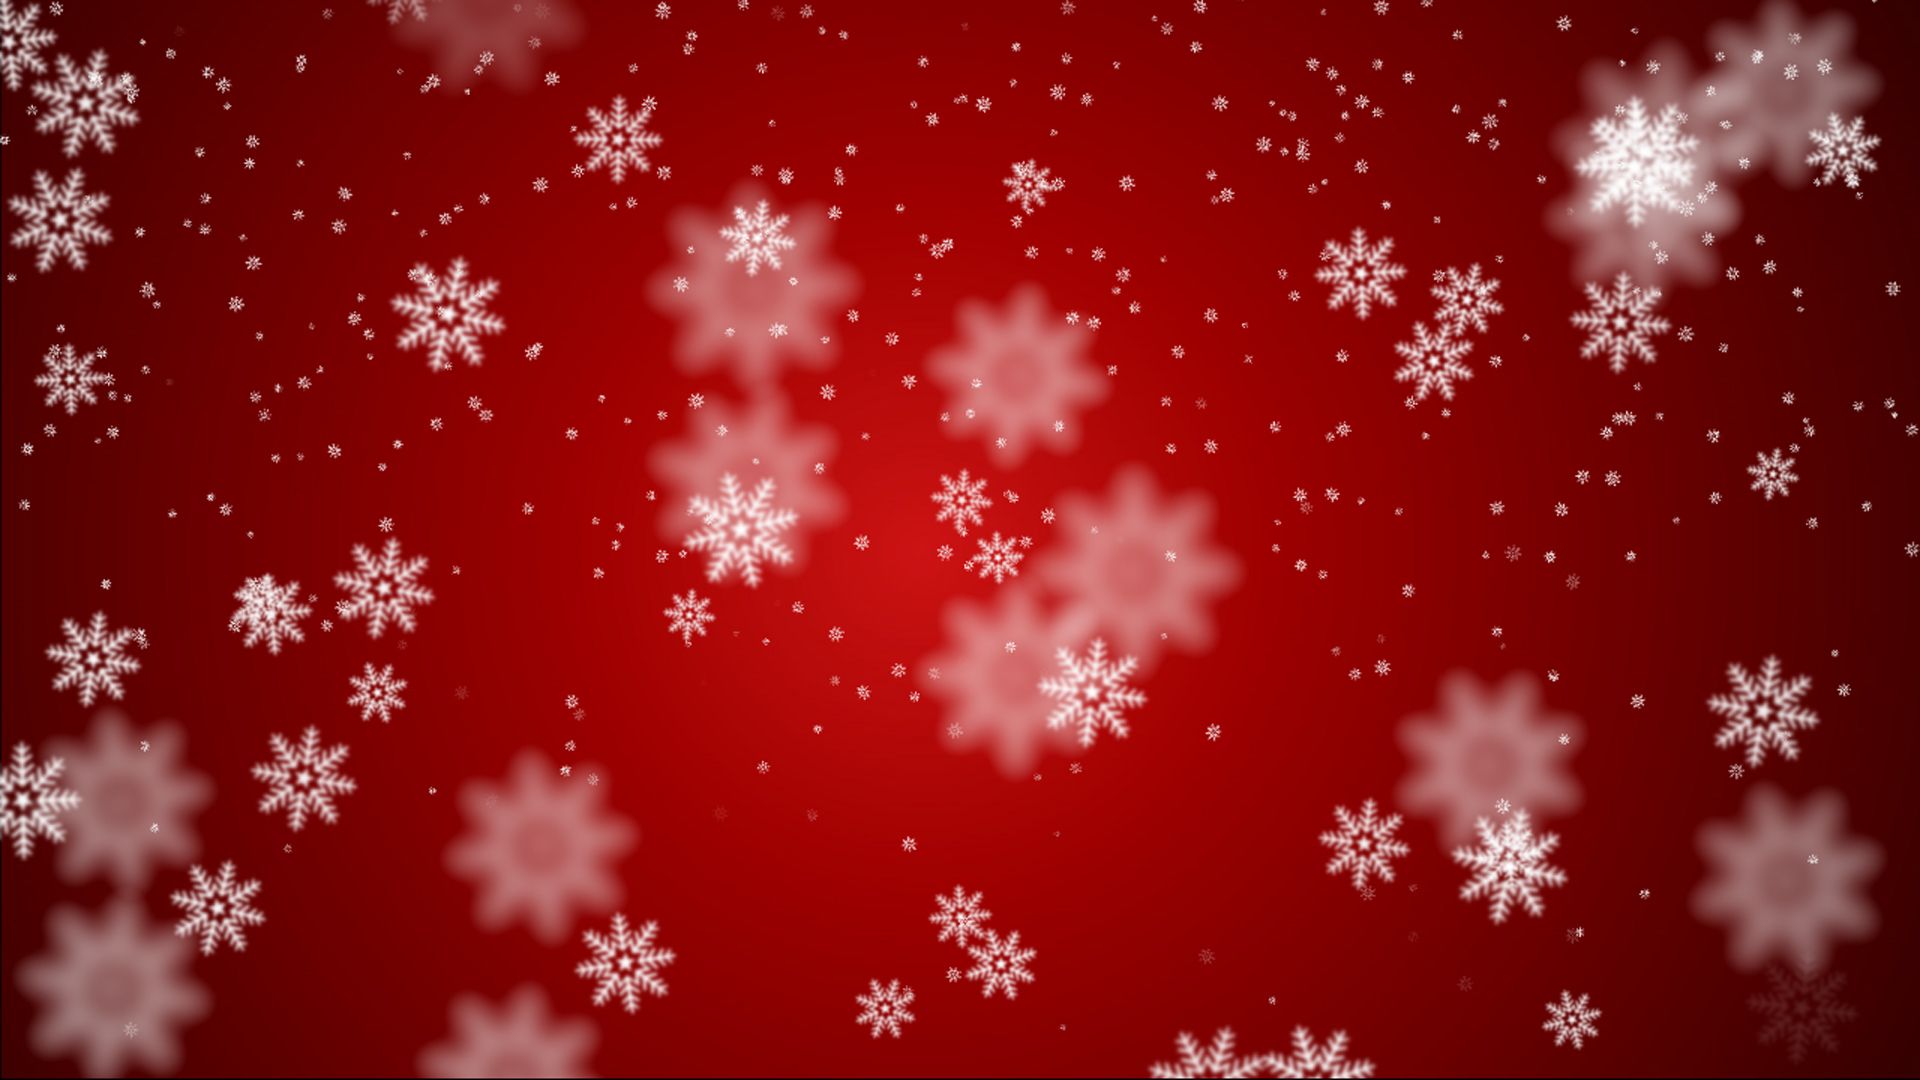 Free Christmas PowerPoint Backgrounds/Wallpapers Download - PPT ...